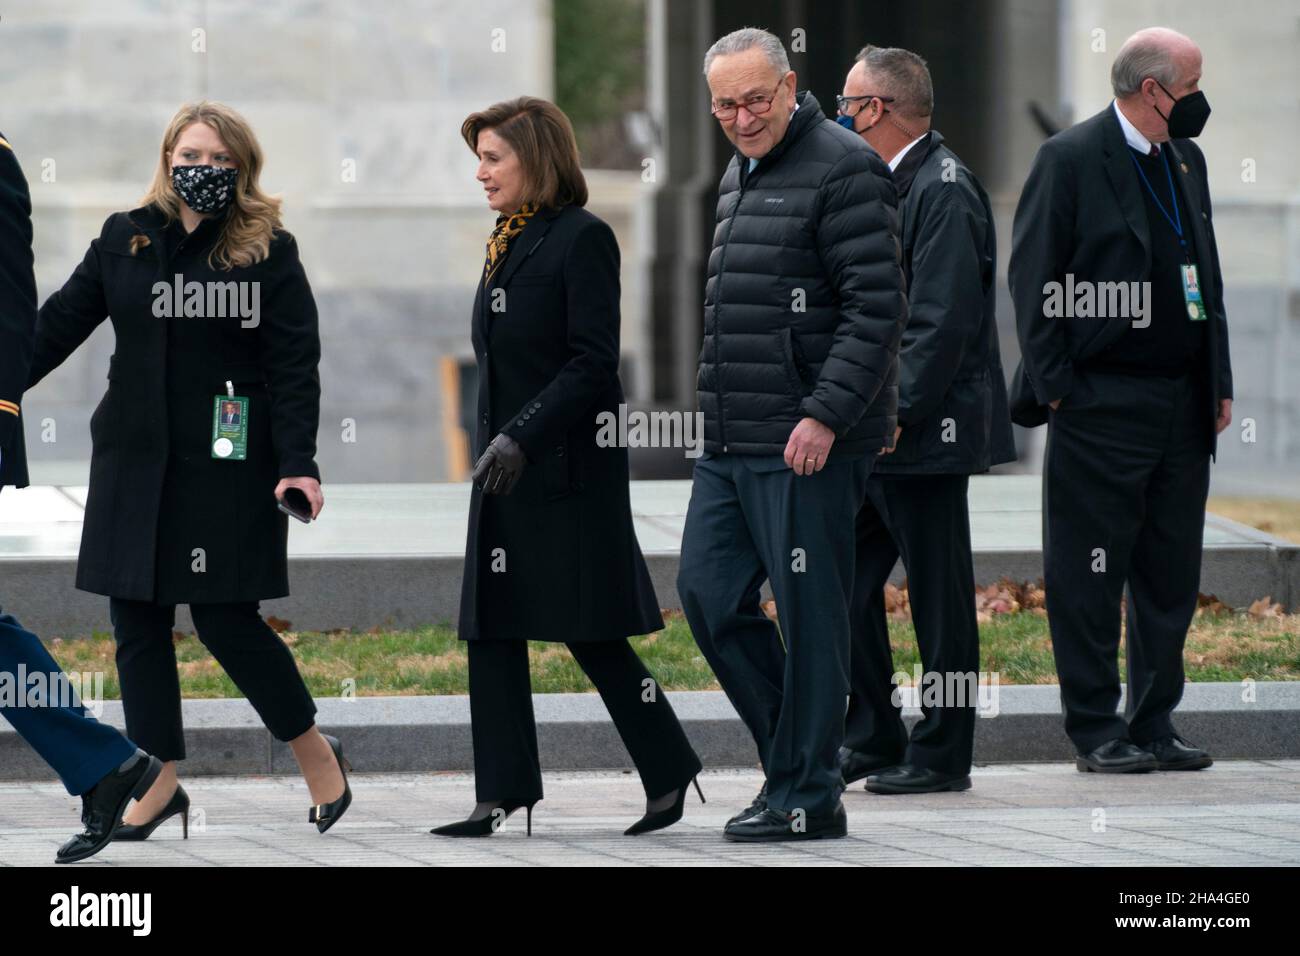 Washington, USA. 10th Dec, 2021. Speaker Nancy Pelosi (D-Calif.) and Majority Leader Charles Schumer (D-N.Y.) are seen before a military honor guard carries the casket of Sen. Bob Dole (R-Kan.) after lying in state at the U.S. Capitol in Washington, DC, on Friday, December 10, 2021. Dole will be taken to Washington National Cathedral for a funeral service. (Photo by Greg Nash/Pool/Sipa USA) Credit: Sipa USA/Alamy Live News Stock Photo